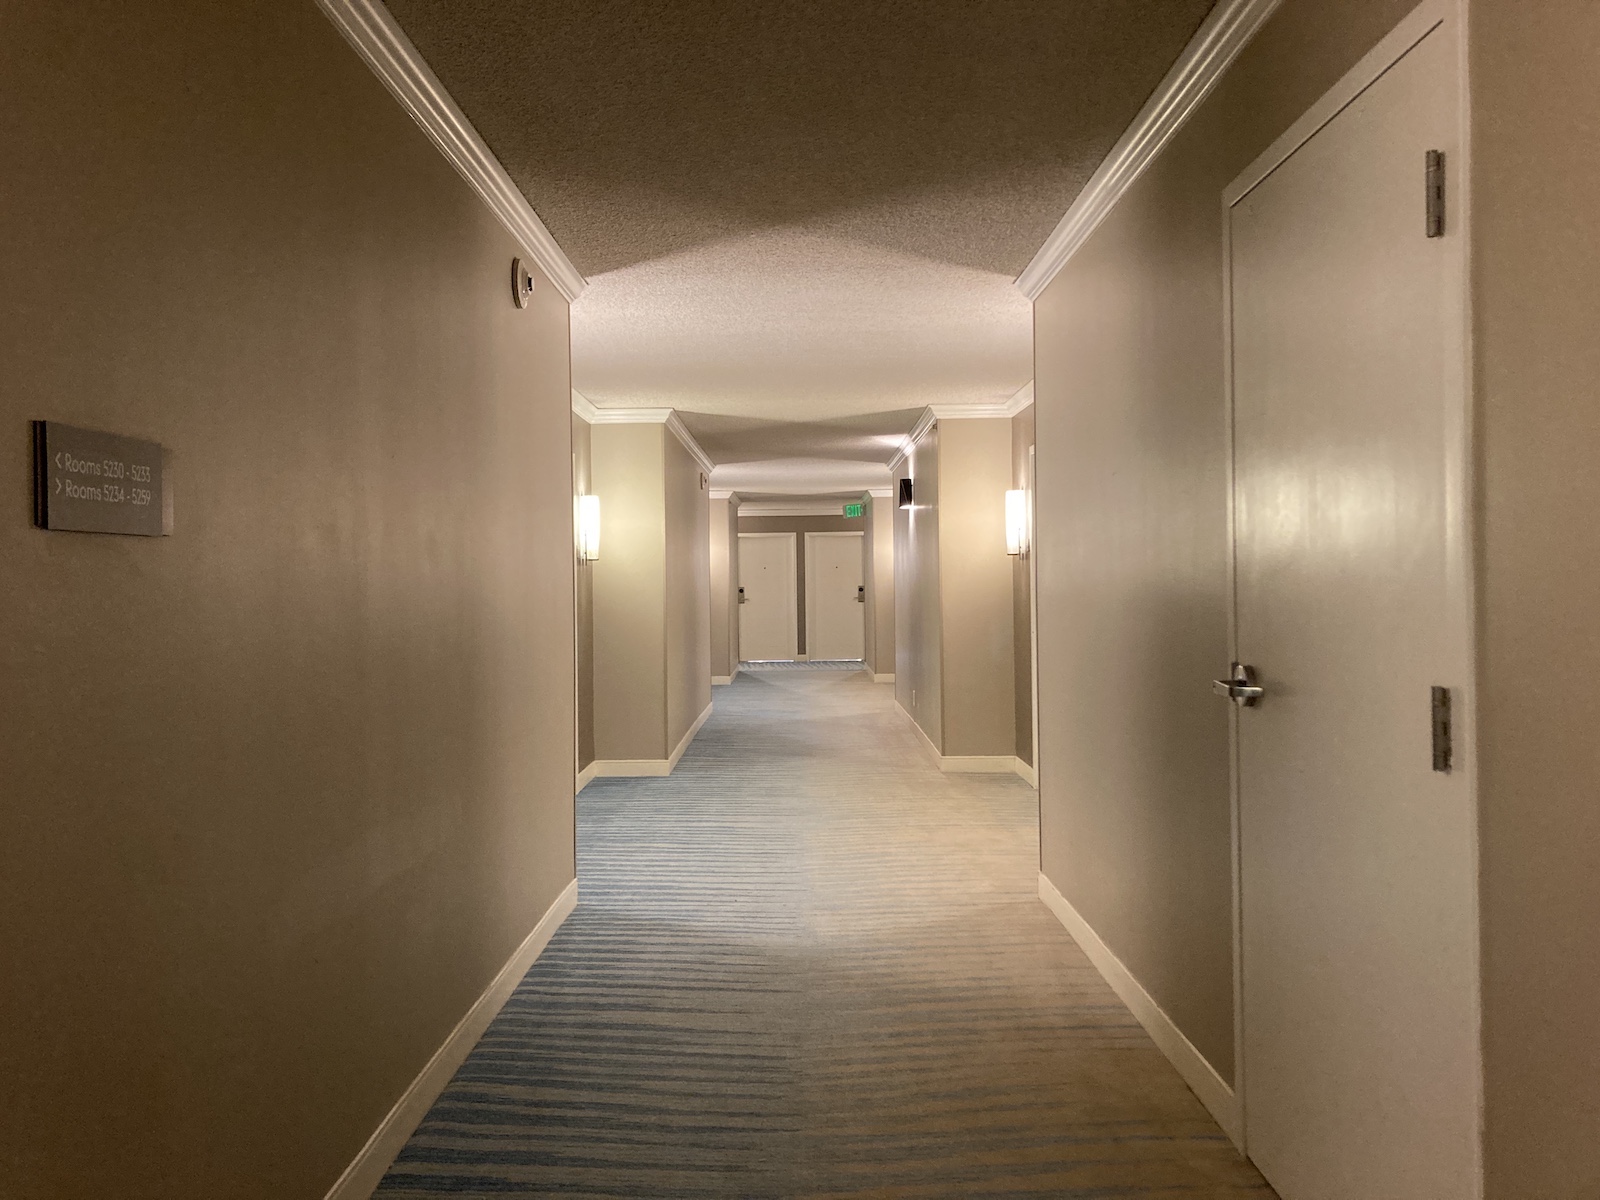 Photo of an empty hallway well lit at a hotel, with doors along the corridor